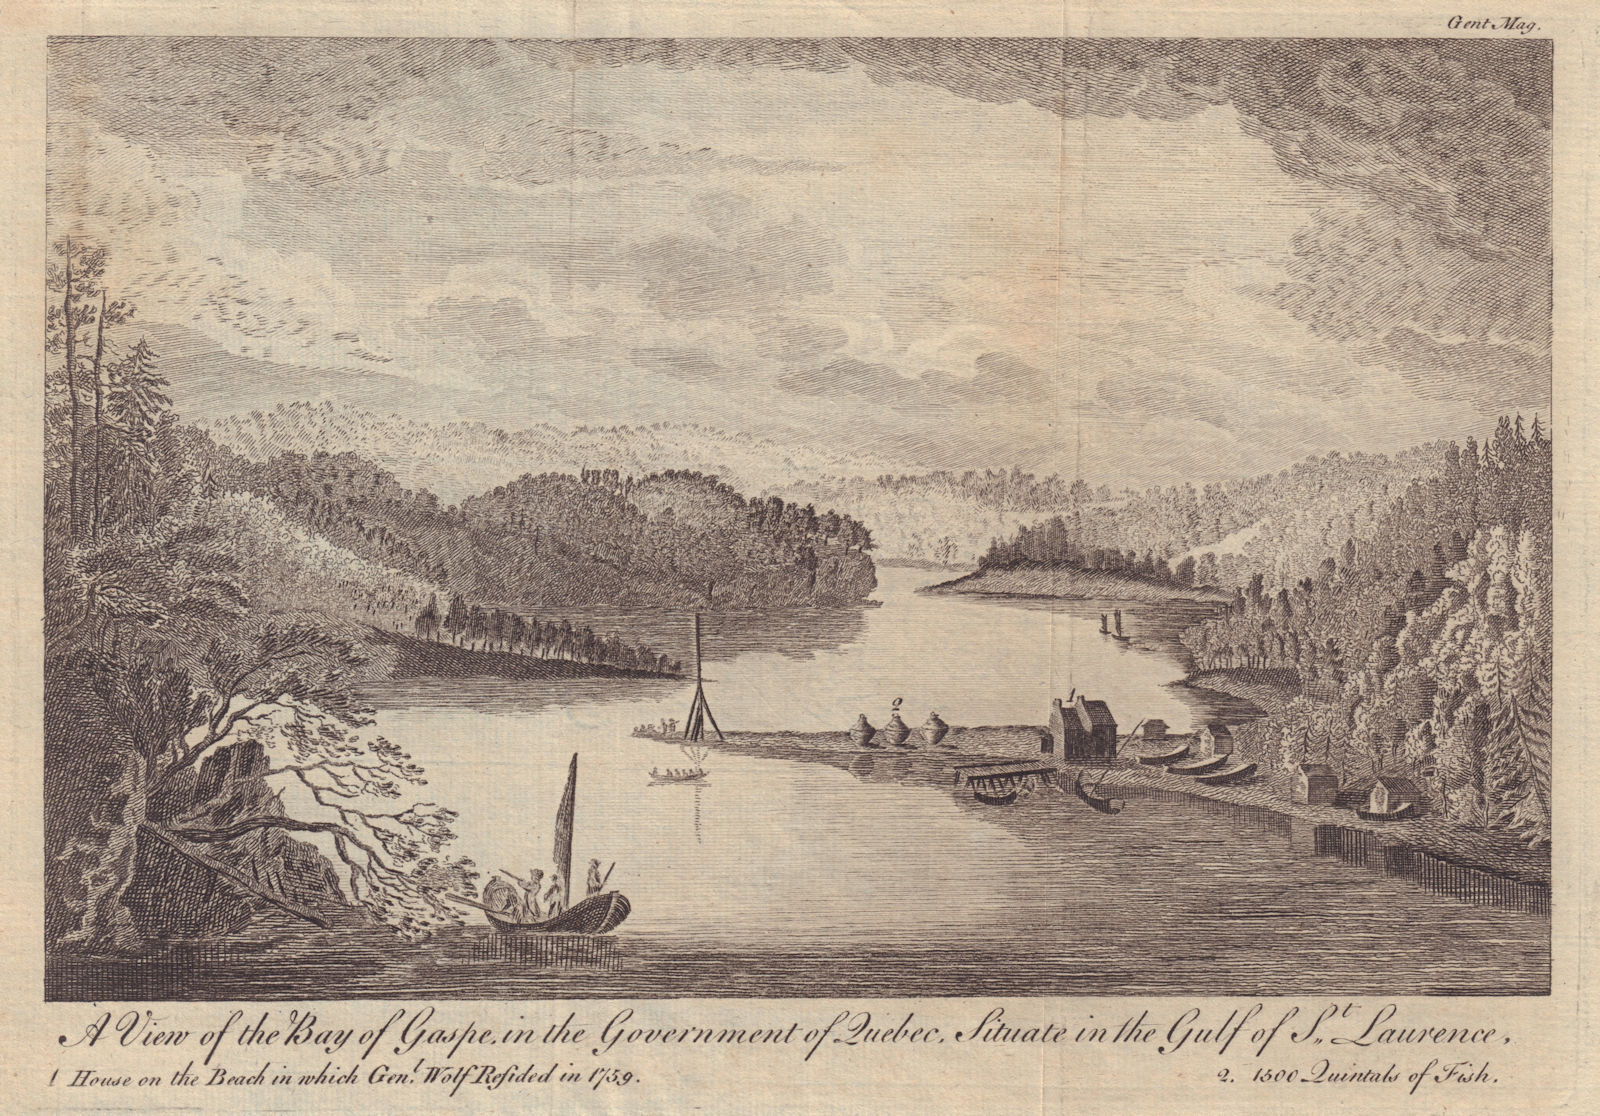 Associate Product View of the Bay of Gaspé in the Government of Quebec… Gulf of St. Laurence 1764